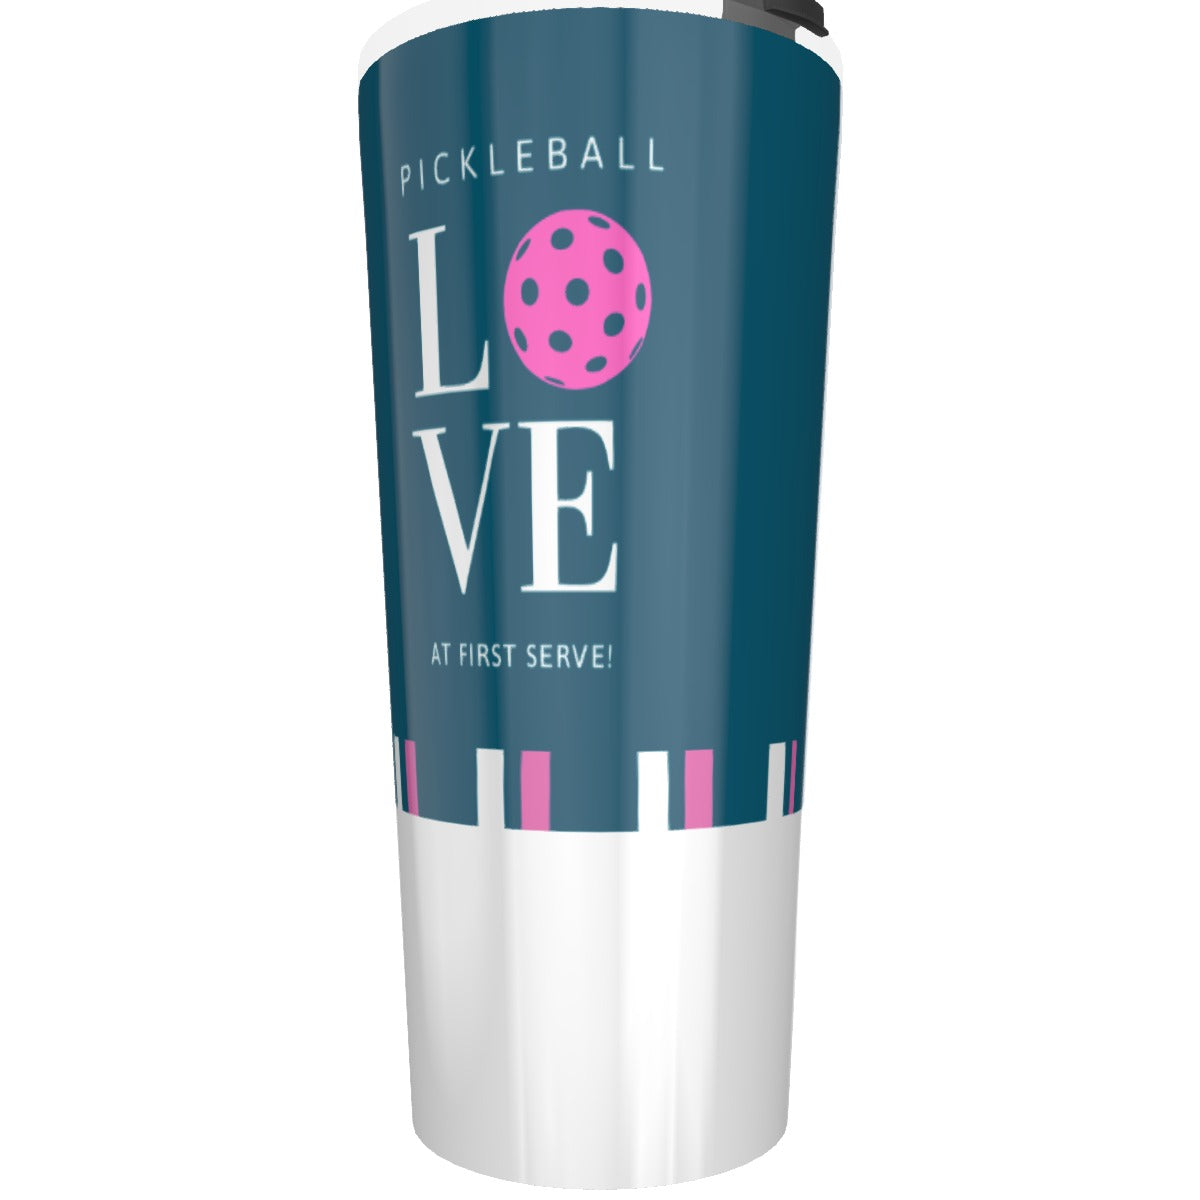 Dizzy Pickle Love at First Serve - Teal/Pink - Tumbler 30oz